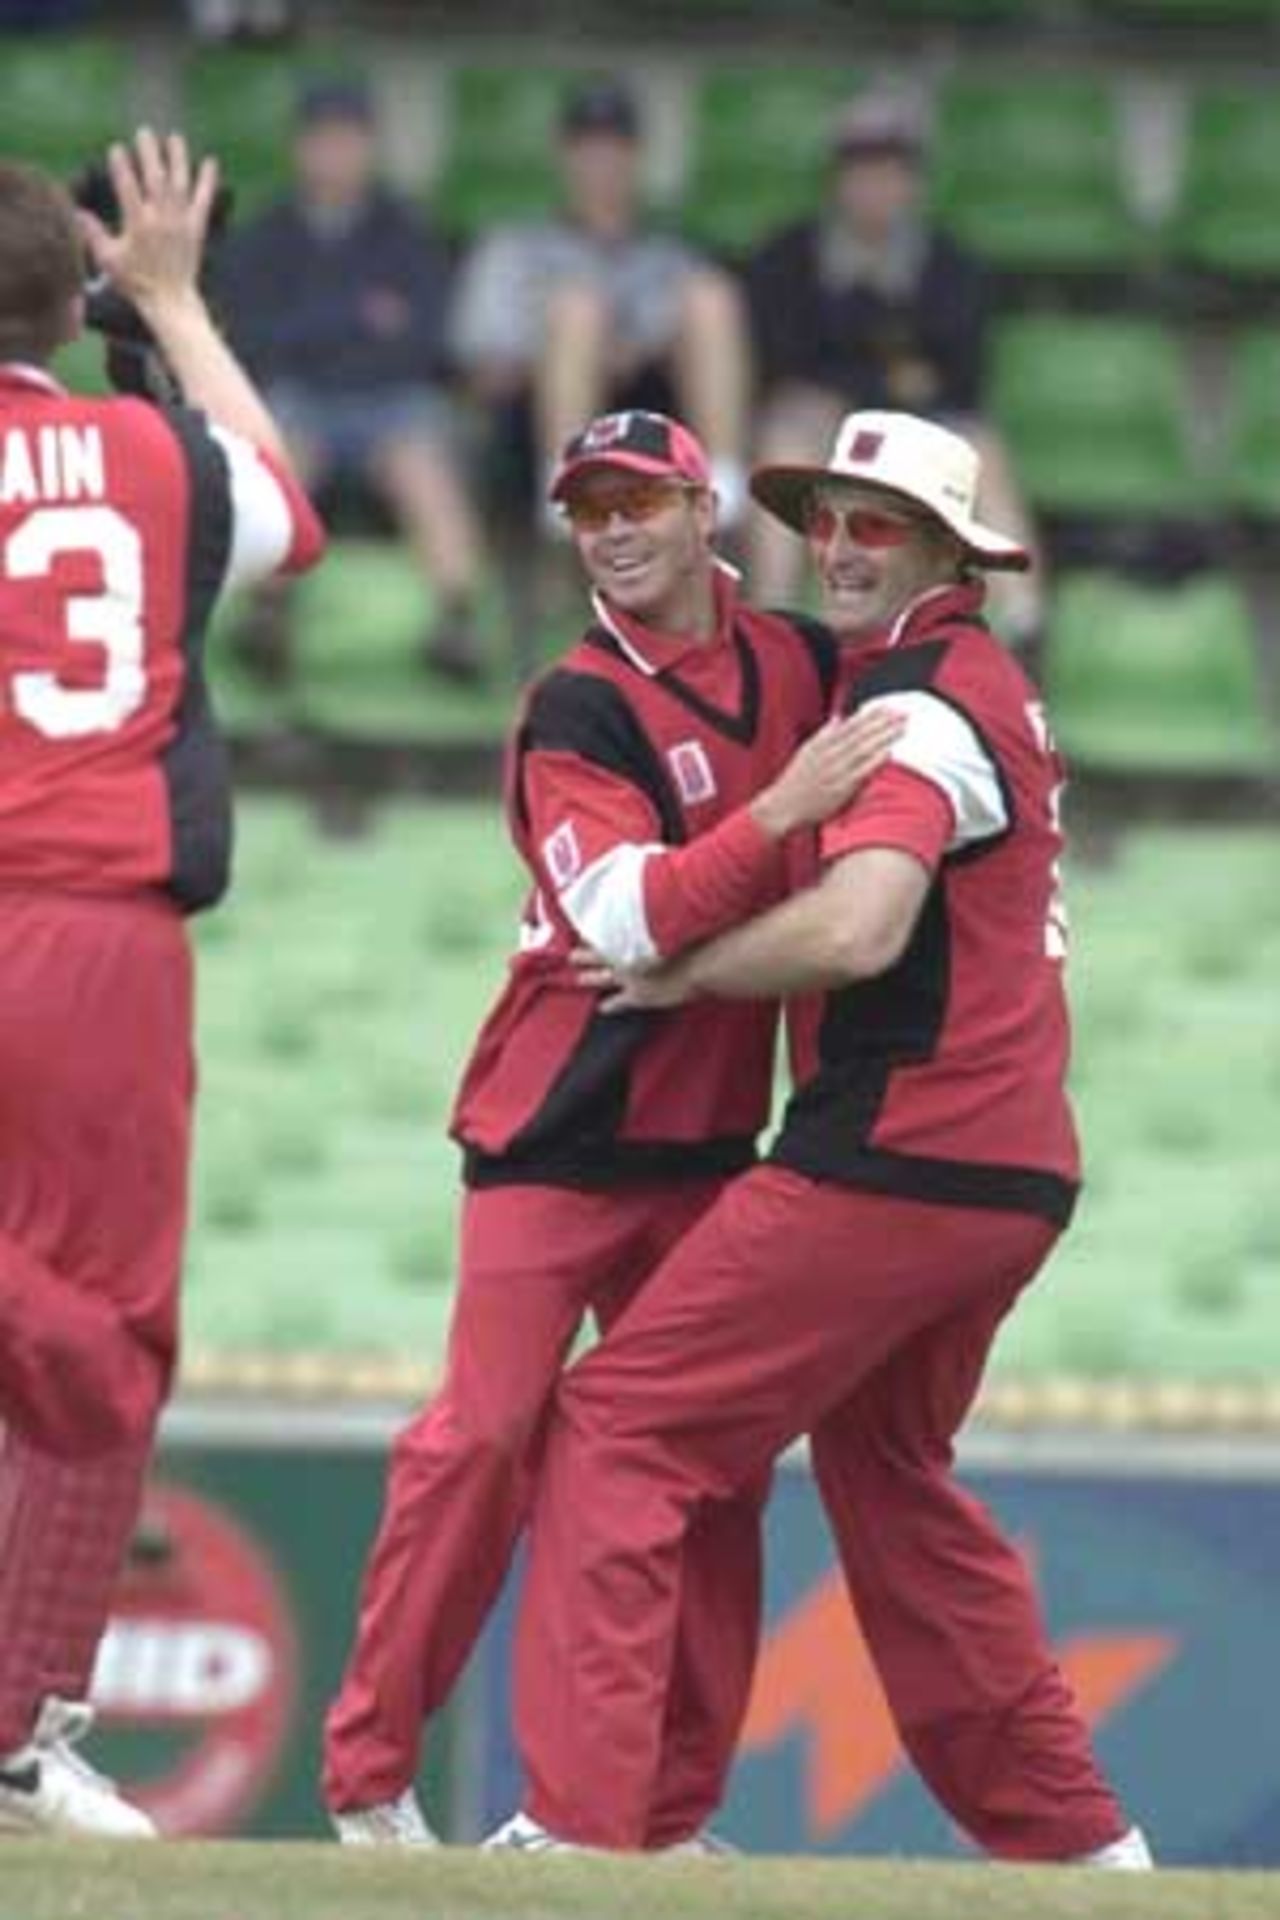 20 Oct 2000: Greg Blewett hugs Paul Wilson of South Australia after Justin Langer (not pictured) was dismissed for a duck in the Mercantile Mutual Cup match between the Western Australian Warriors and South Australian Redbacks at the WACA ground in Perth, Australia.